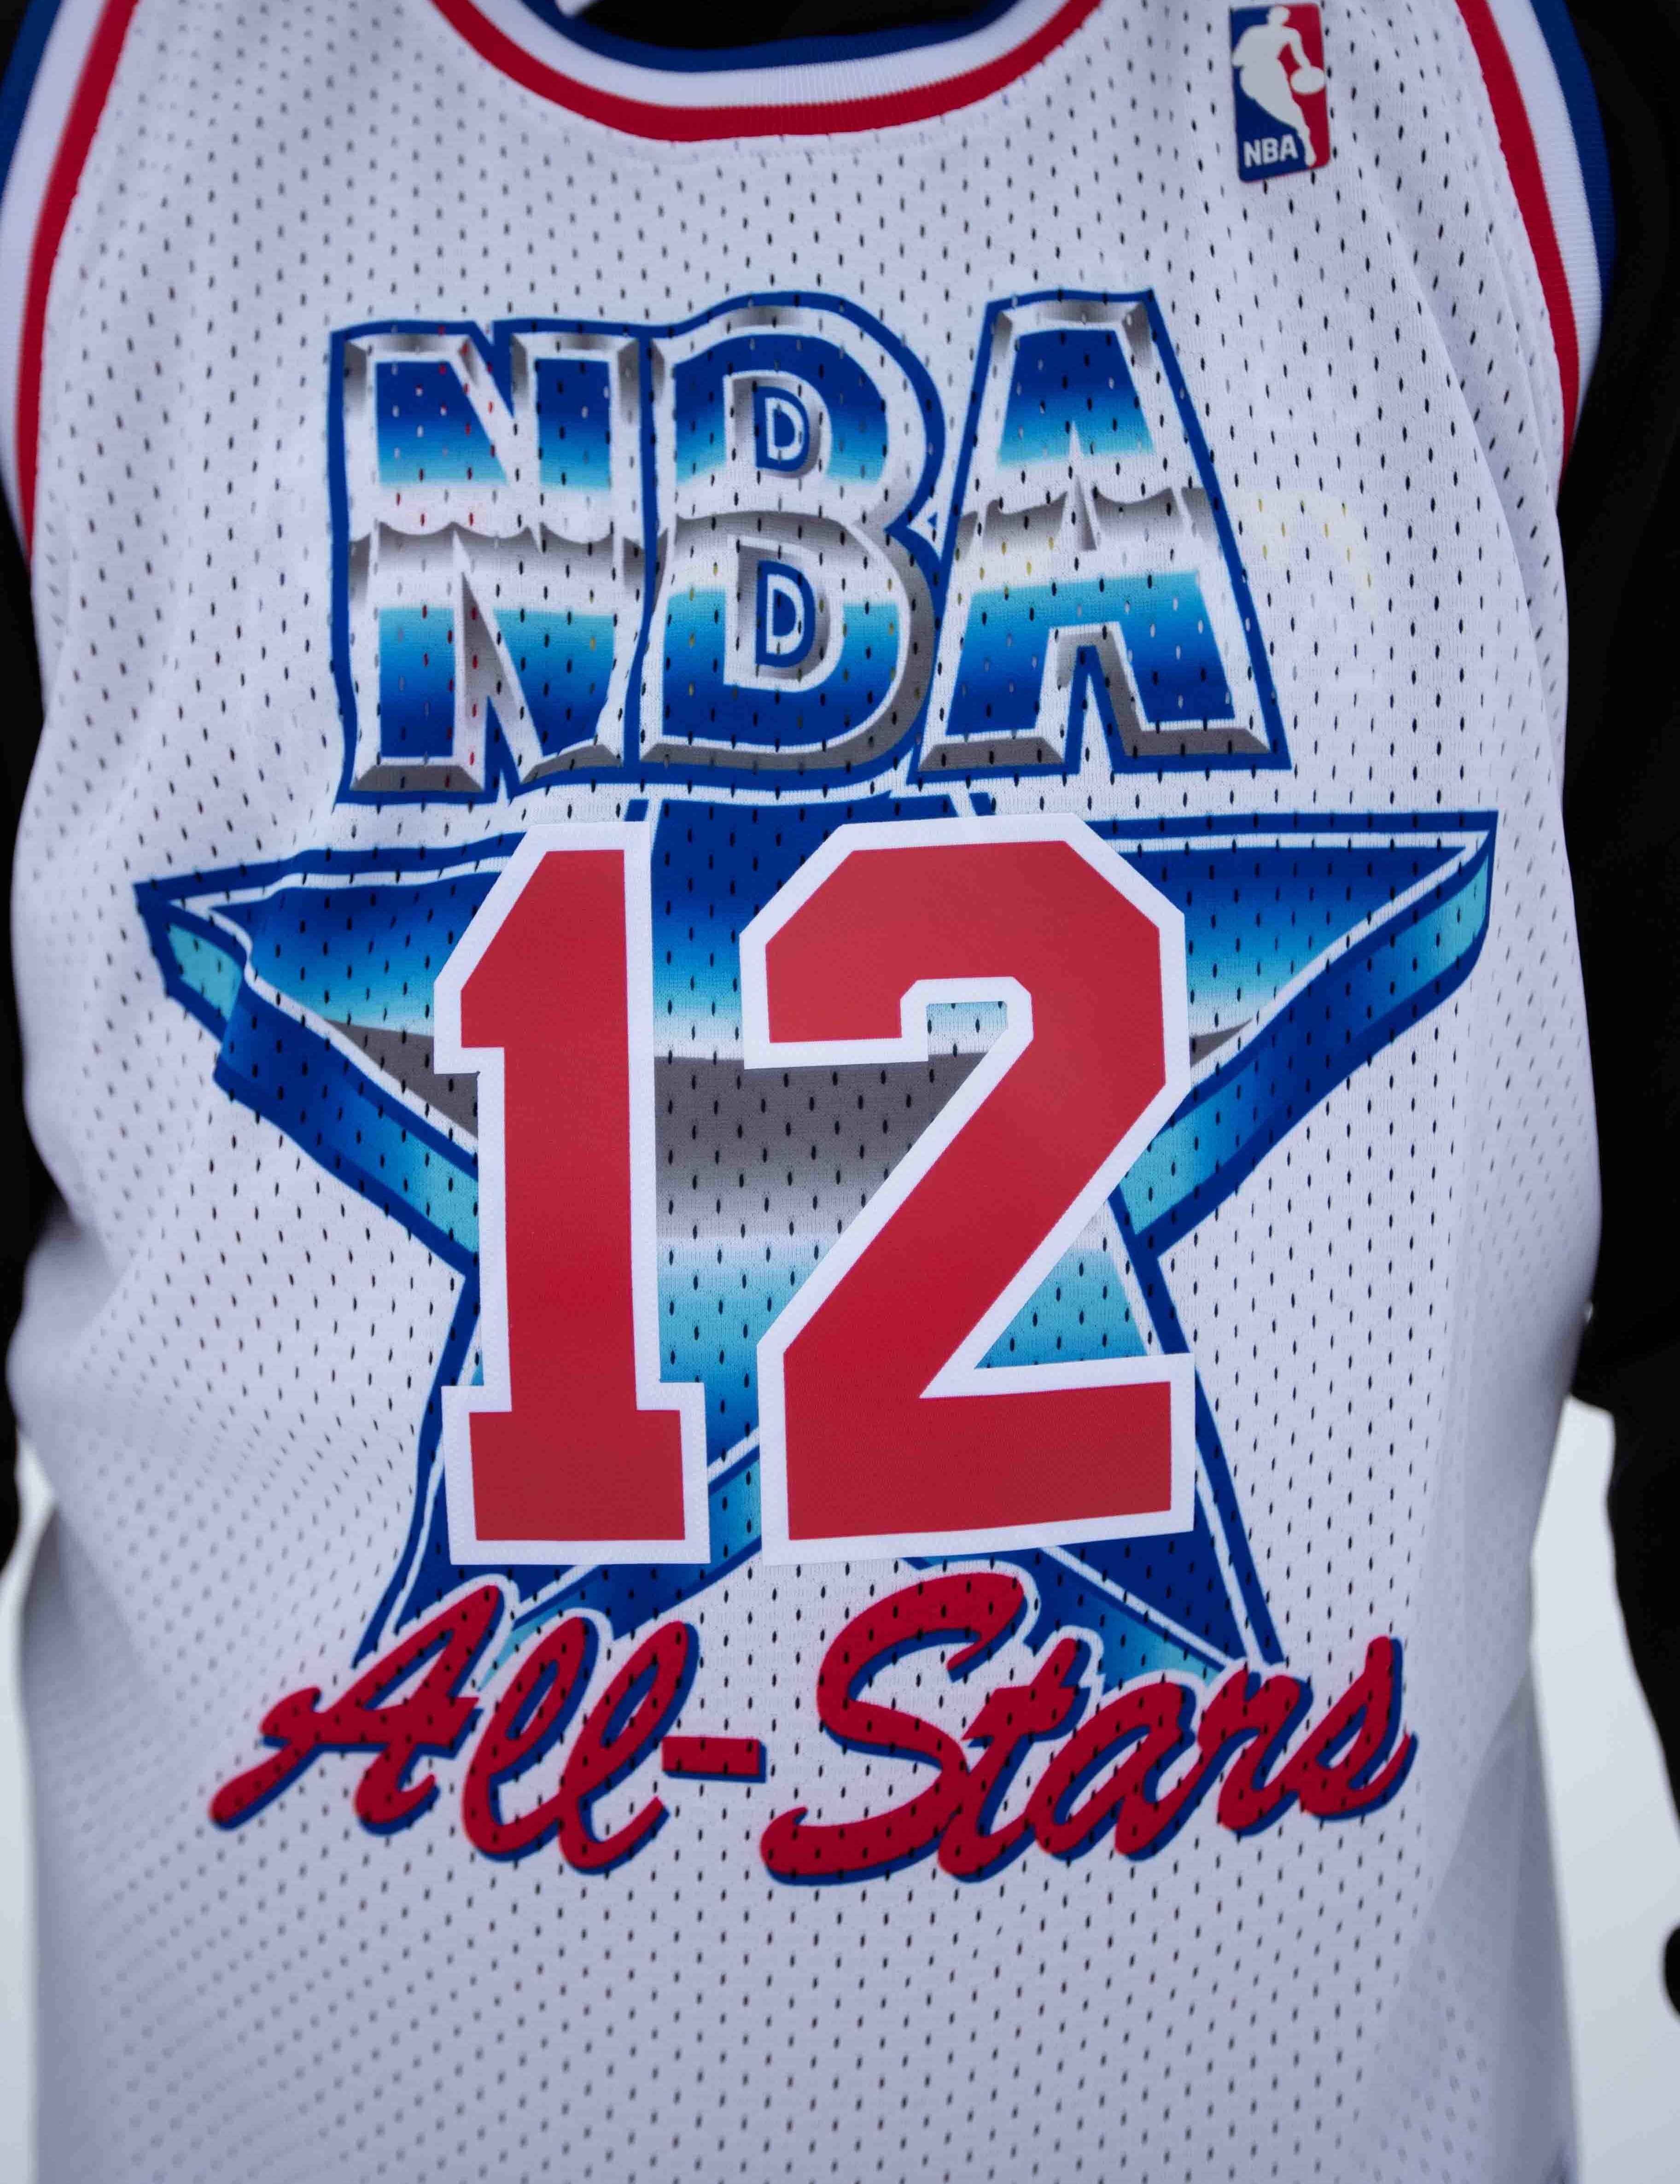 The NBA All-Star game is Sunday (3-7-21)  Here's how to buy all-star fan  gear 